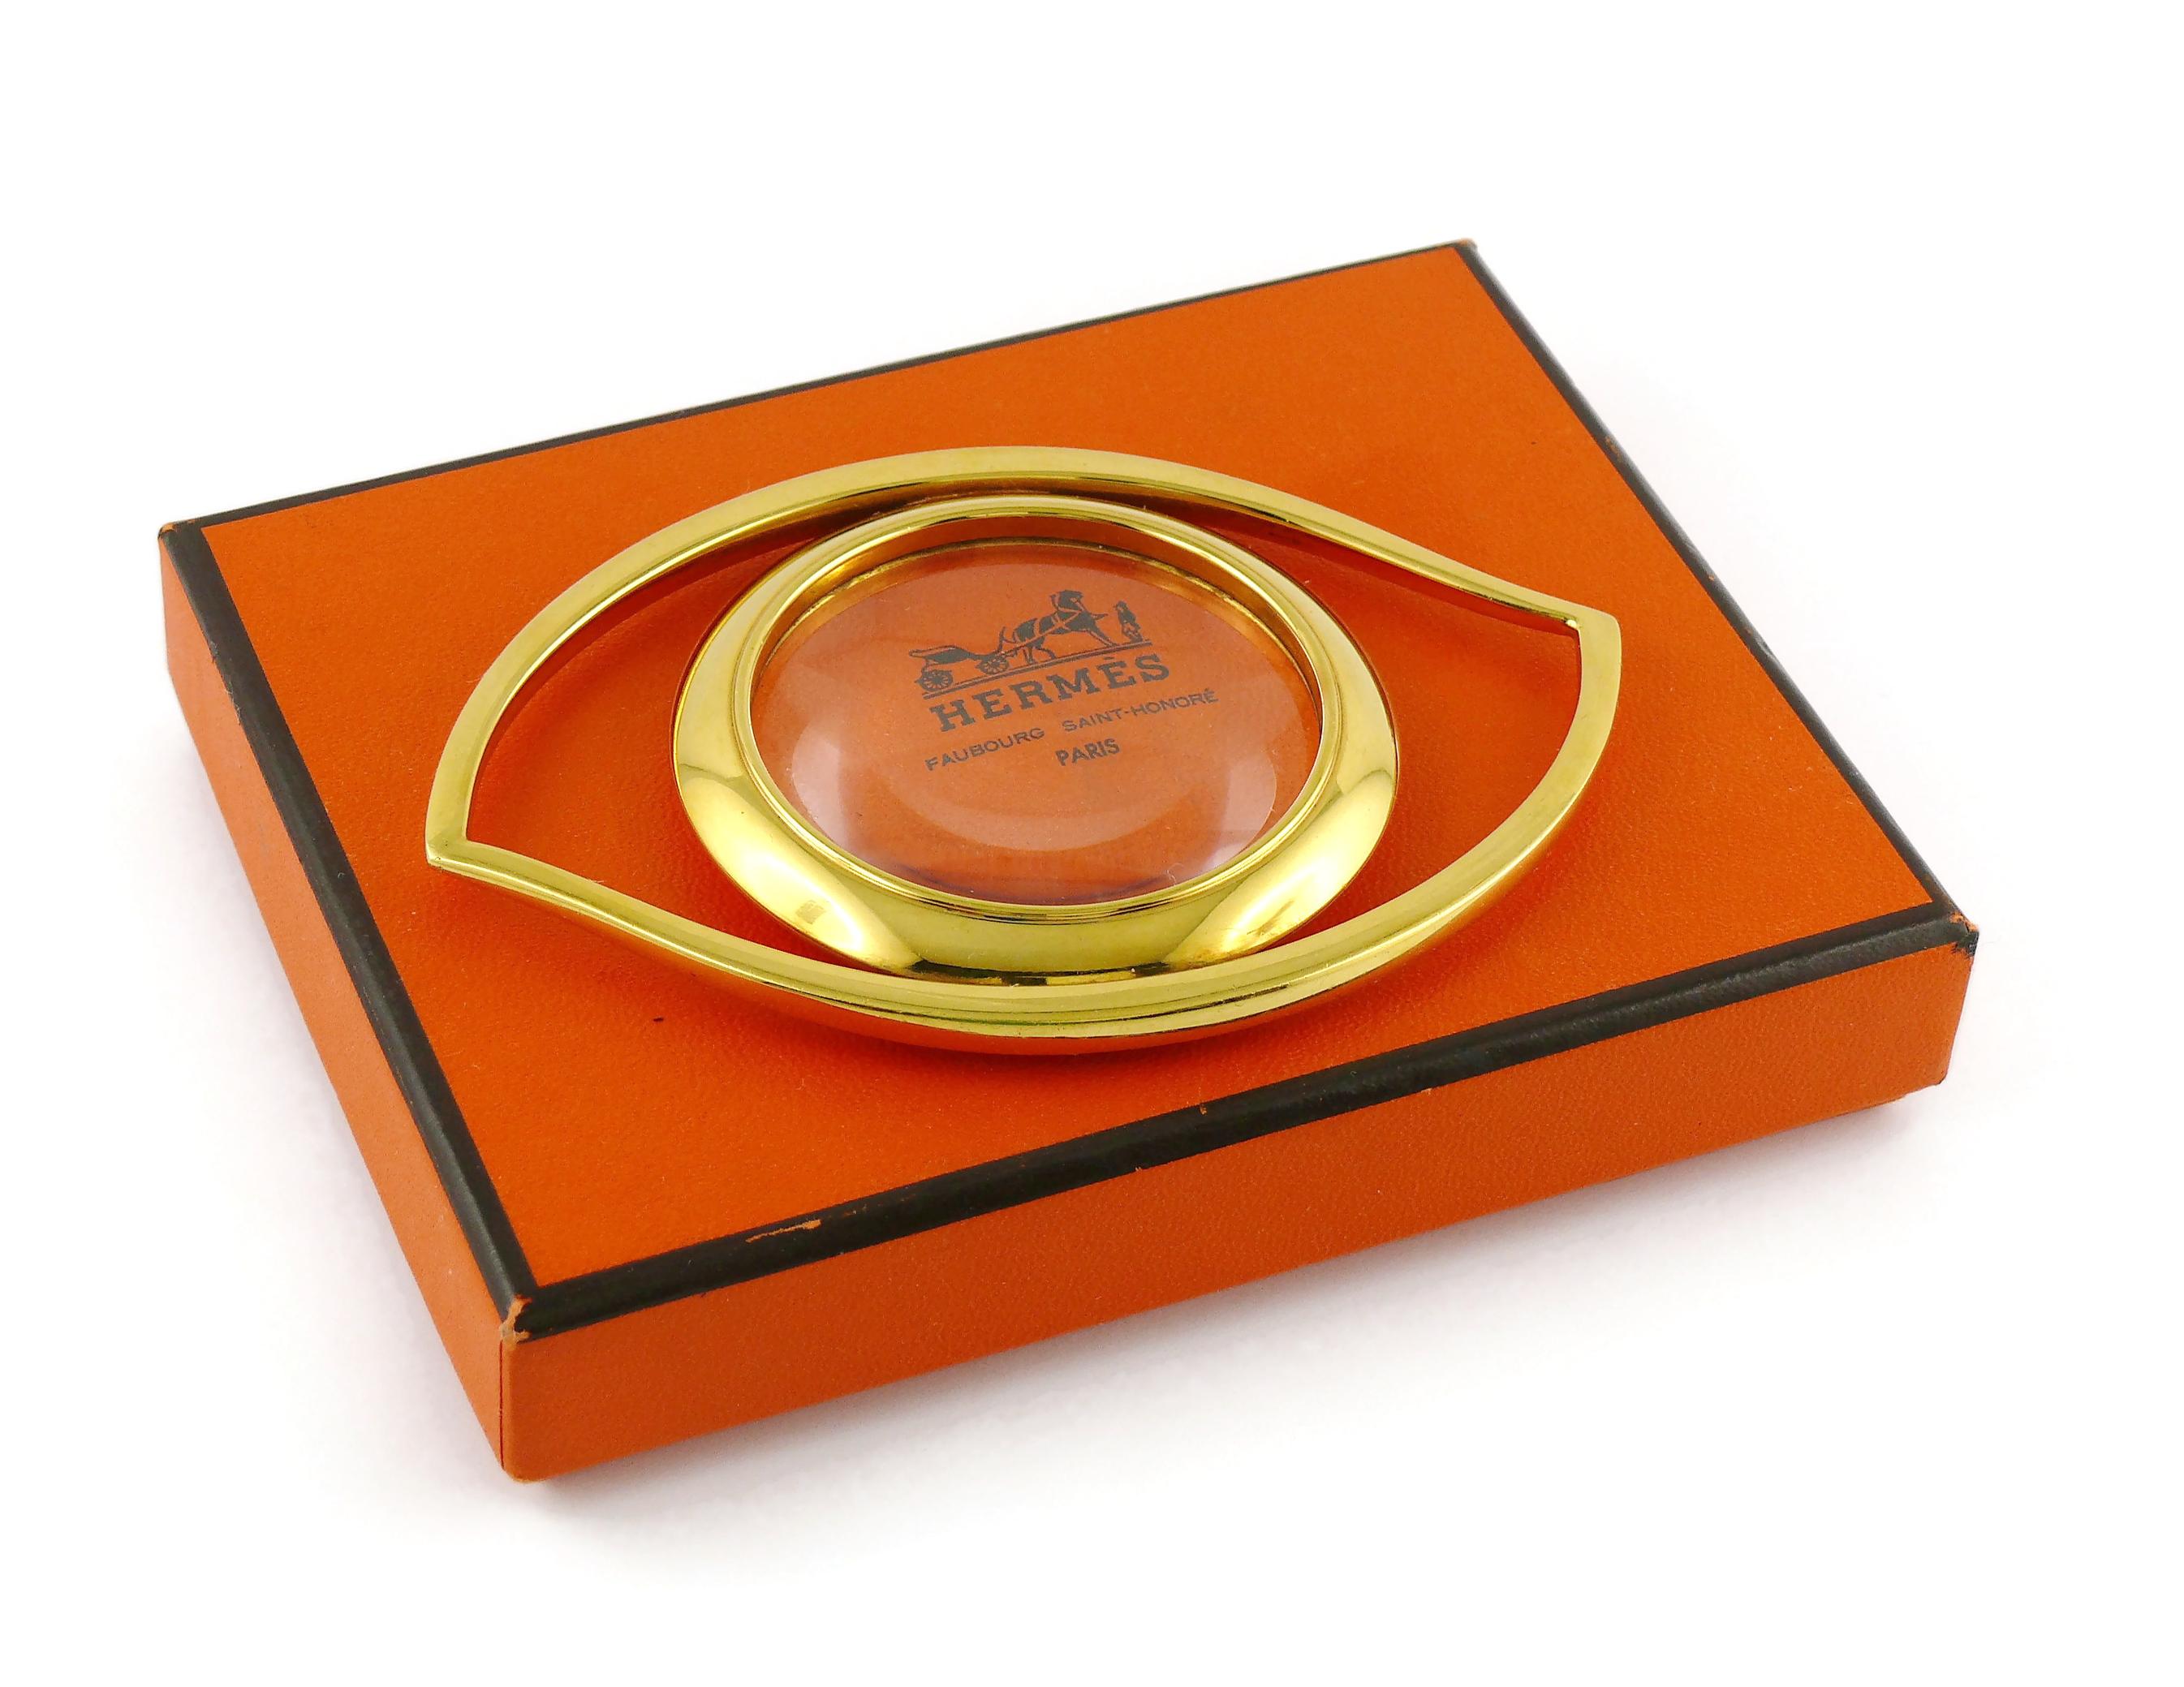 HERMES vintage gold plated desk magnifying glass and paperweight featuring a massive Cleopatra Eye.

Designed in the 1960’s by JEAN COCTEAU for HERMES. This piece is directly inspired by the Egyptian Mythology and surrealist movement.

Embossed